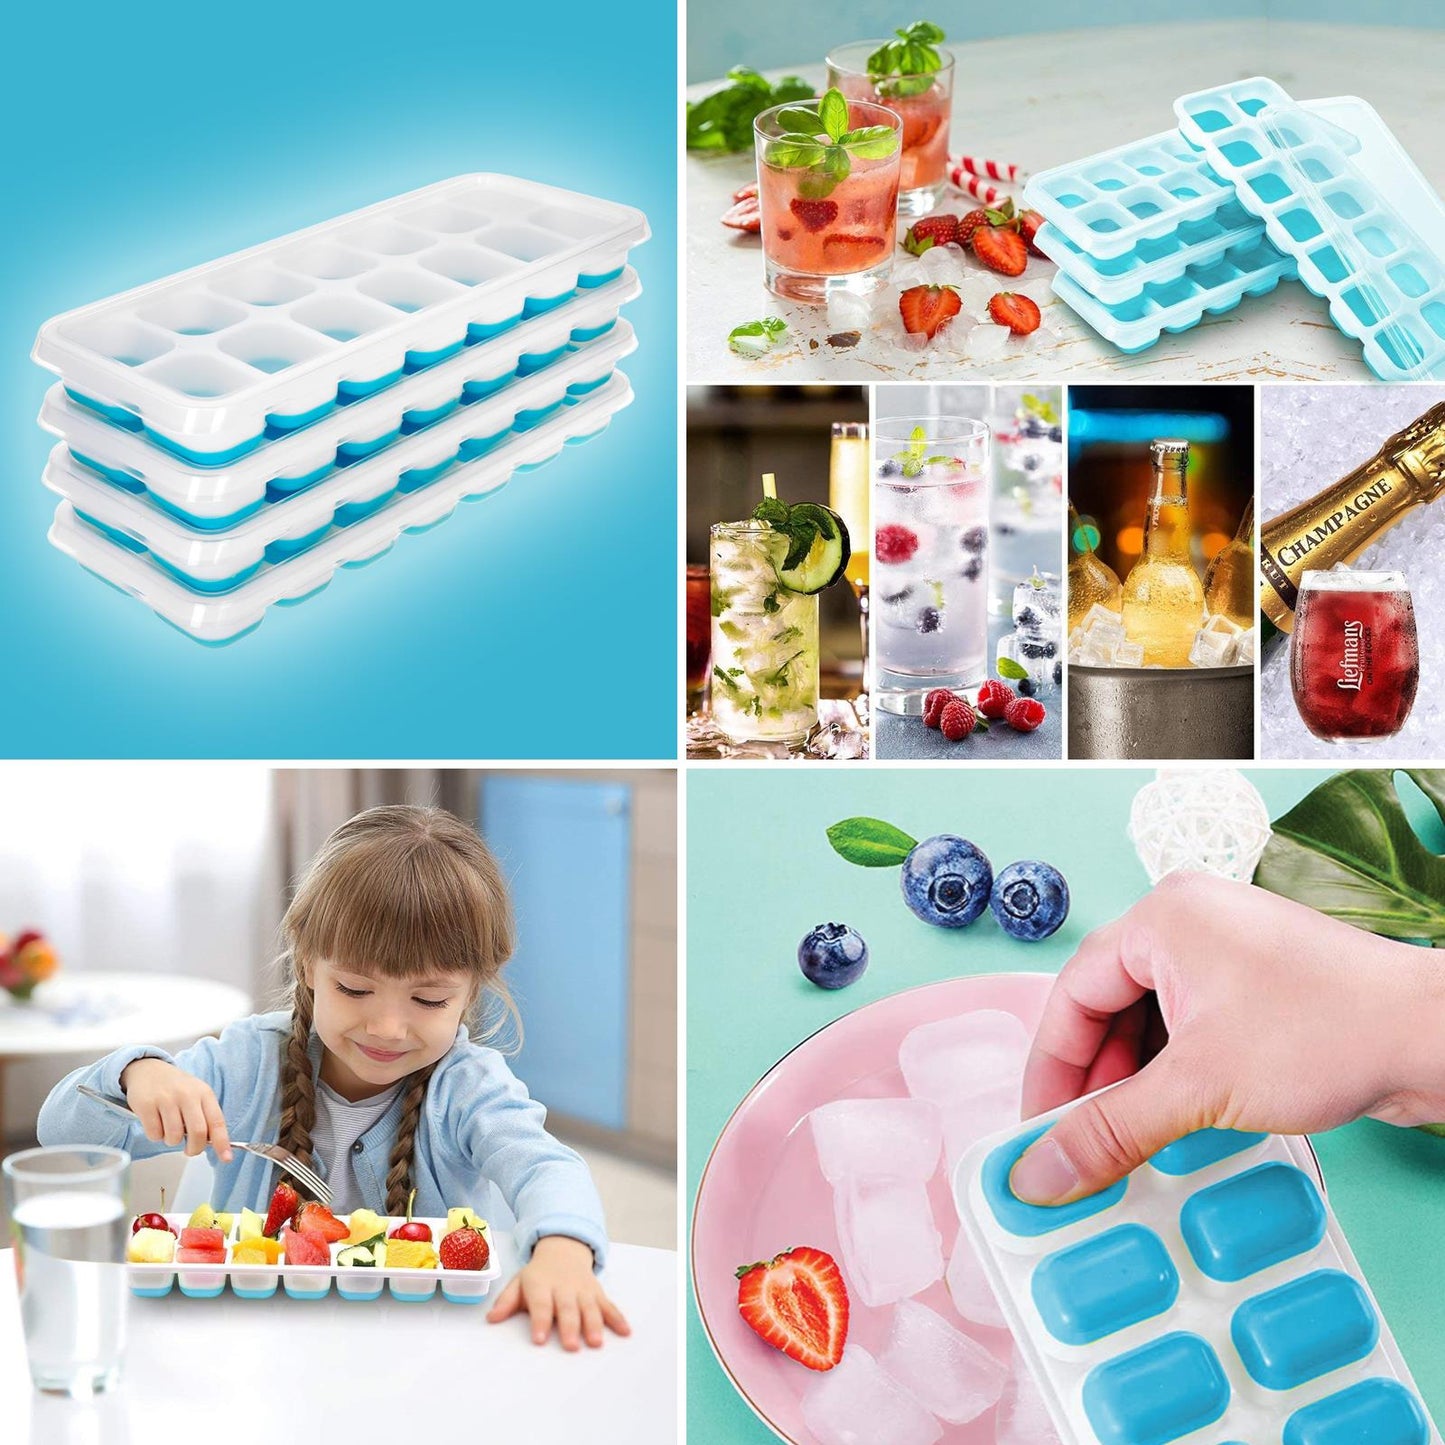 Create ice cubes with ease using 4Pcs Plastic Mini Ice Cube Trays